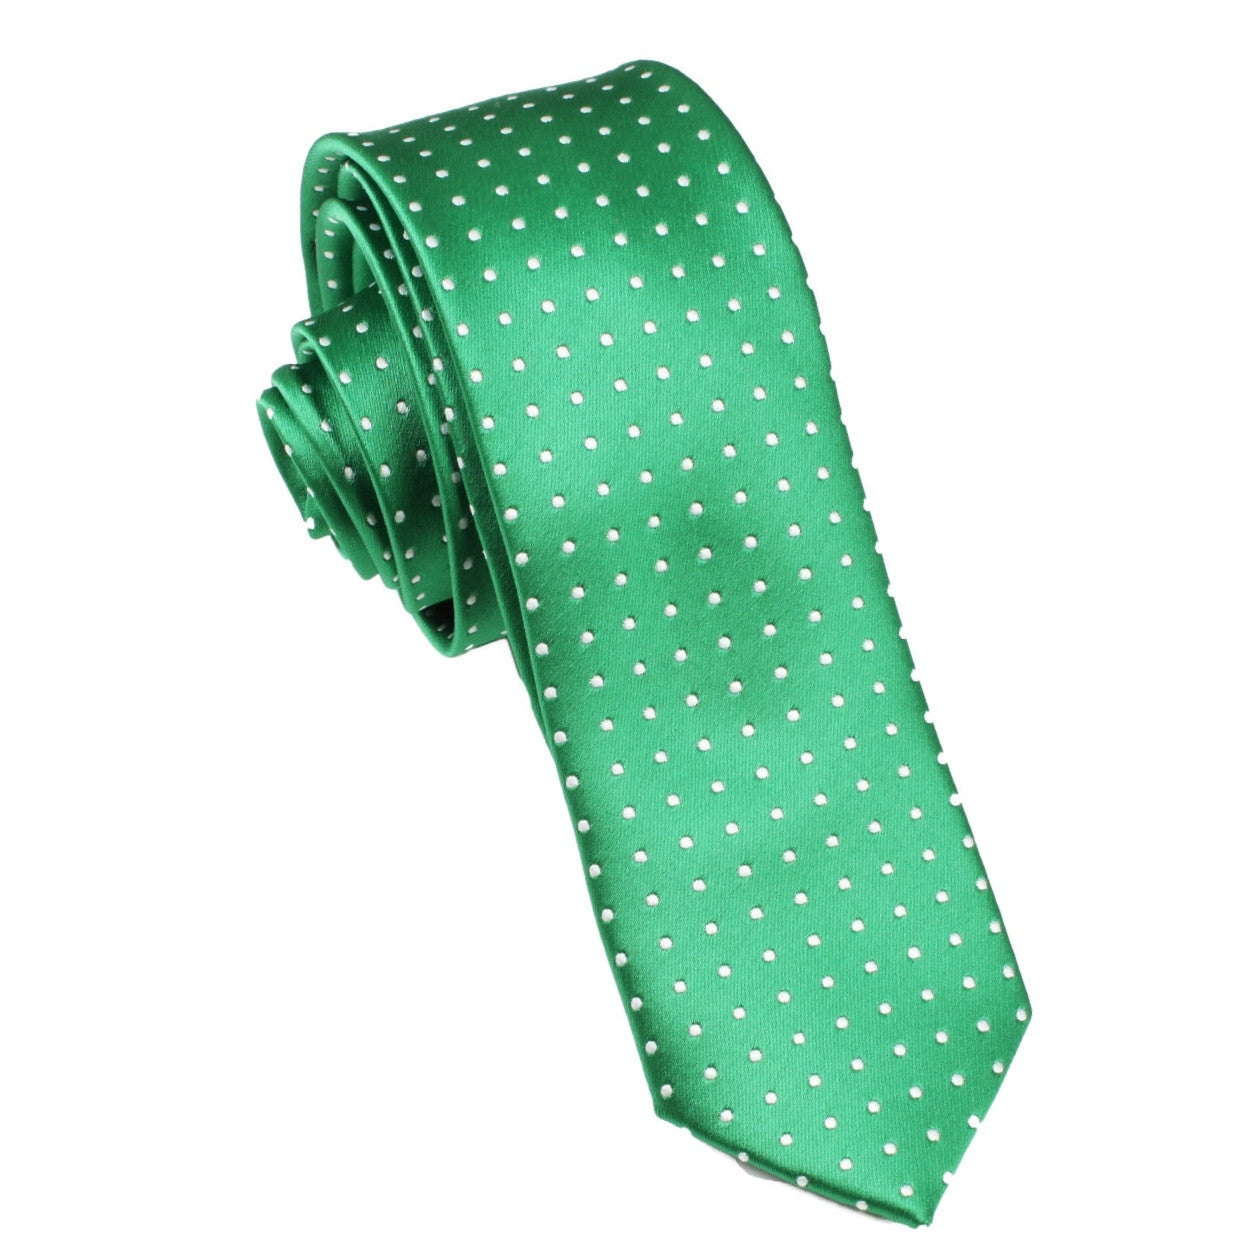 Green Skinny Tie with White Polka Dots